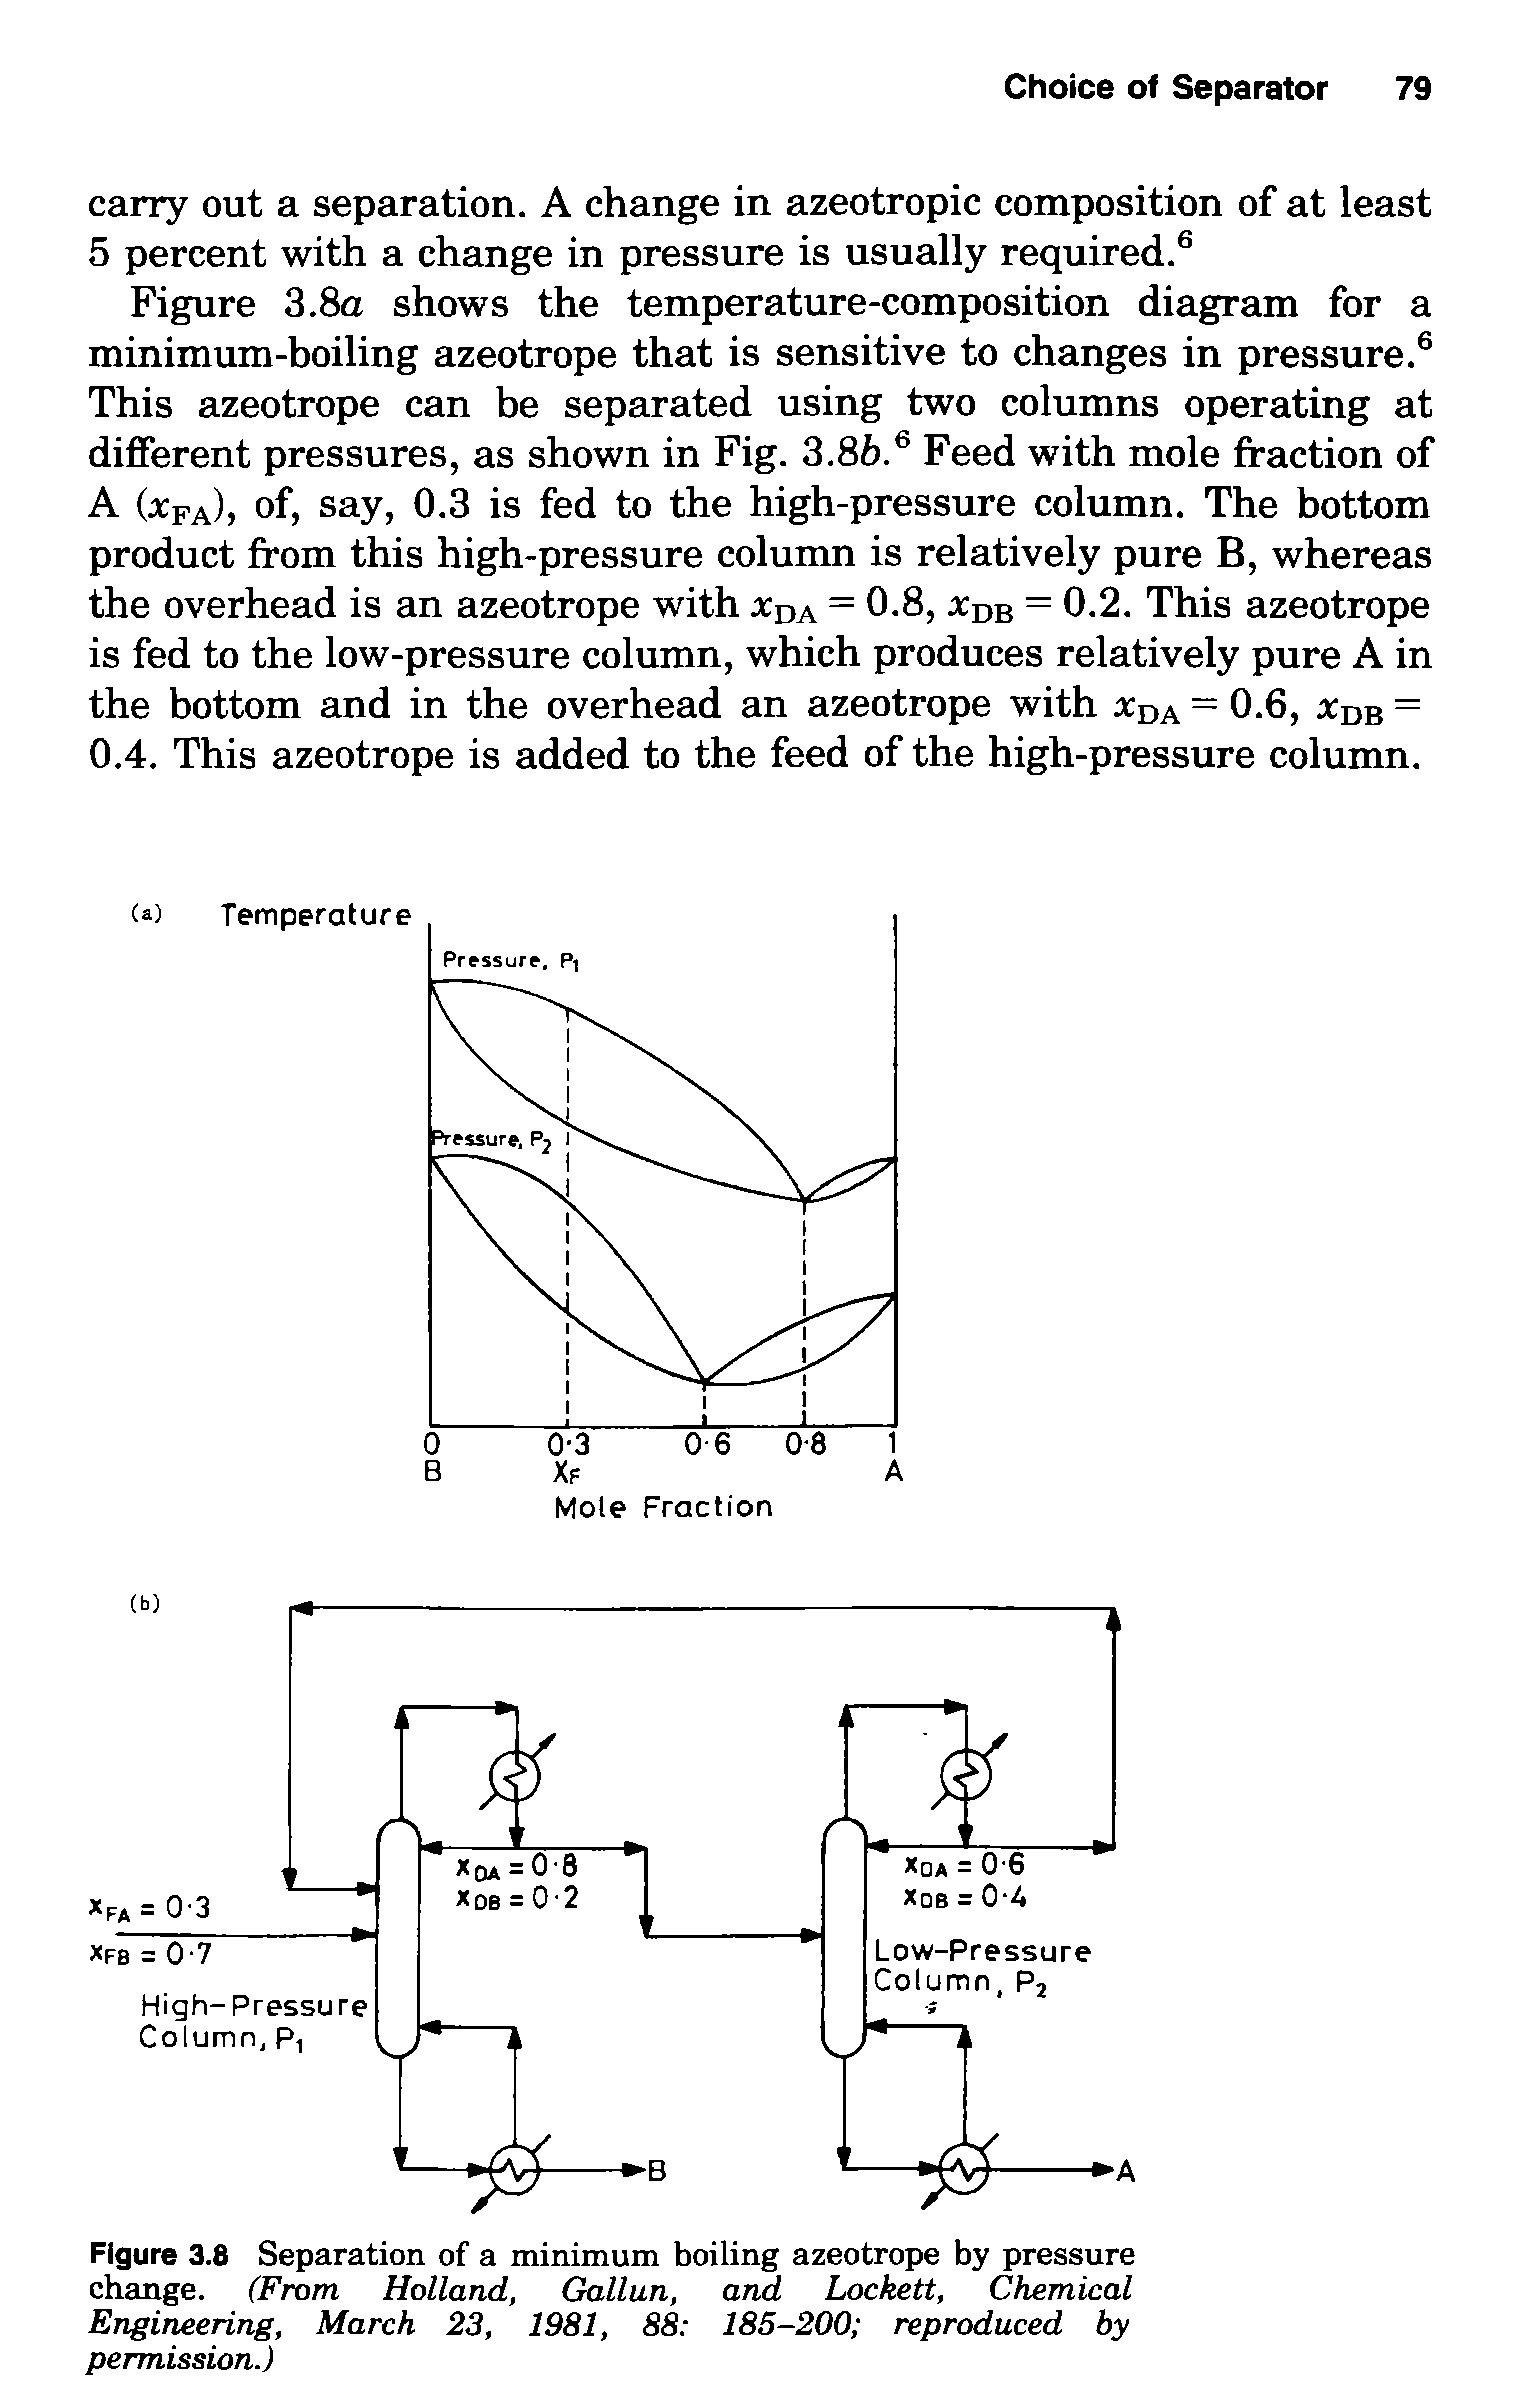 Figure 3.8a shows the temperature-composition diagram for a minimum-boiling azeotrope that is sensitive to changes in pressure. This azeotrope can be separated using two columns operating at different pressures, as shown in Fig. 3.86. Feed with mole fraction of A Ufa)) of, say, 0.3 is fed to the high-pressure column. The bottom product from this high-pressure column is relatively pure B, whereas the overhead is an azeotrope with jcda = 0-8, jcdb = 0.2. This azeotrope is fed to the low-pressure column, which produces relatively pure A in the bottom and in the overhead an azeotrope with jcda = 0.6, jcdb = 0.4. This azeotrope is added to the feed of the high-pressure column.